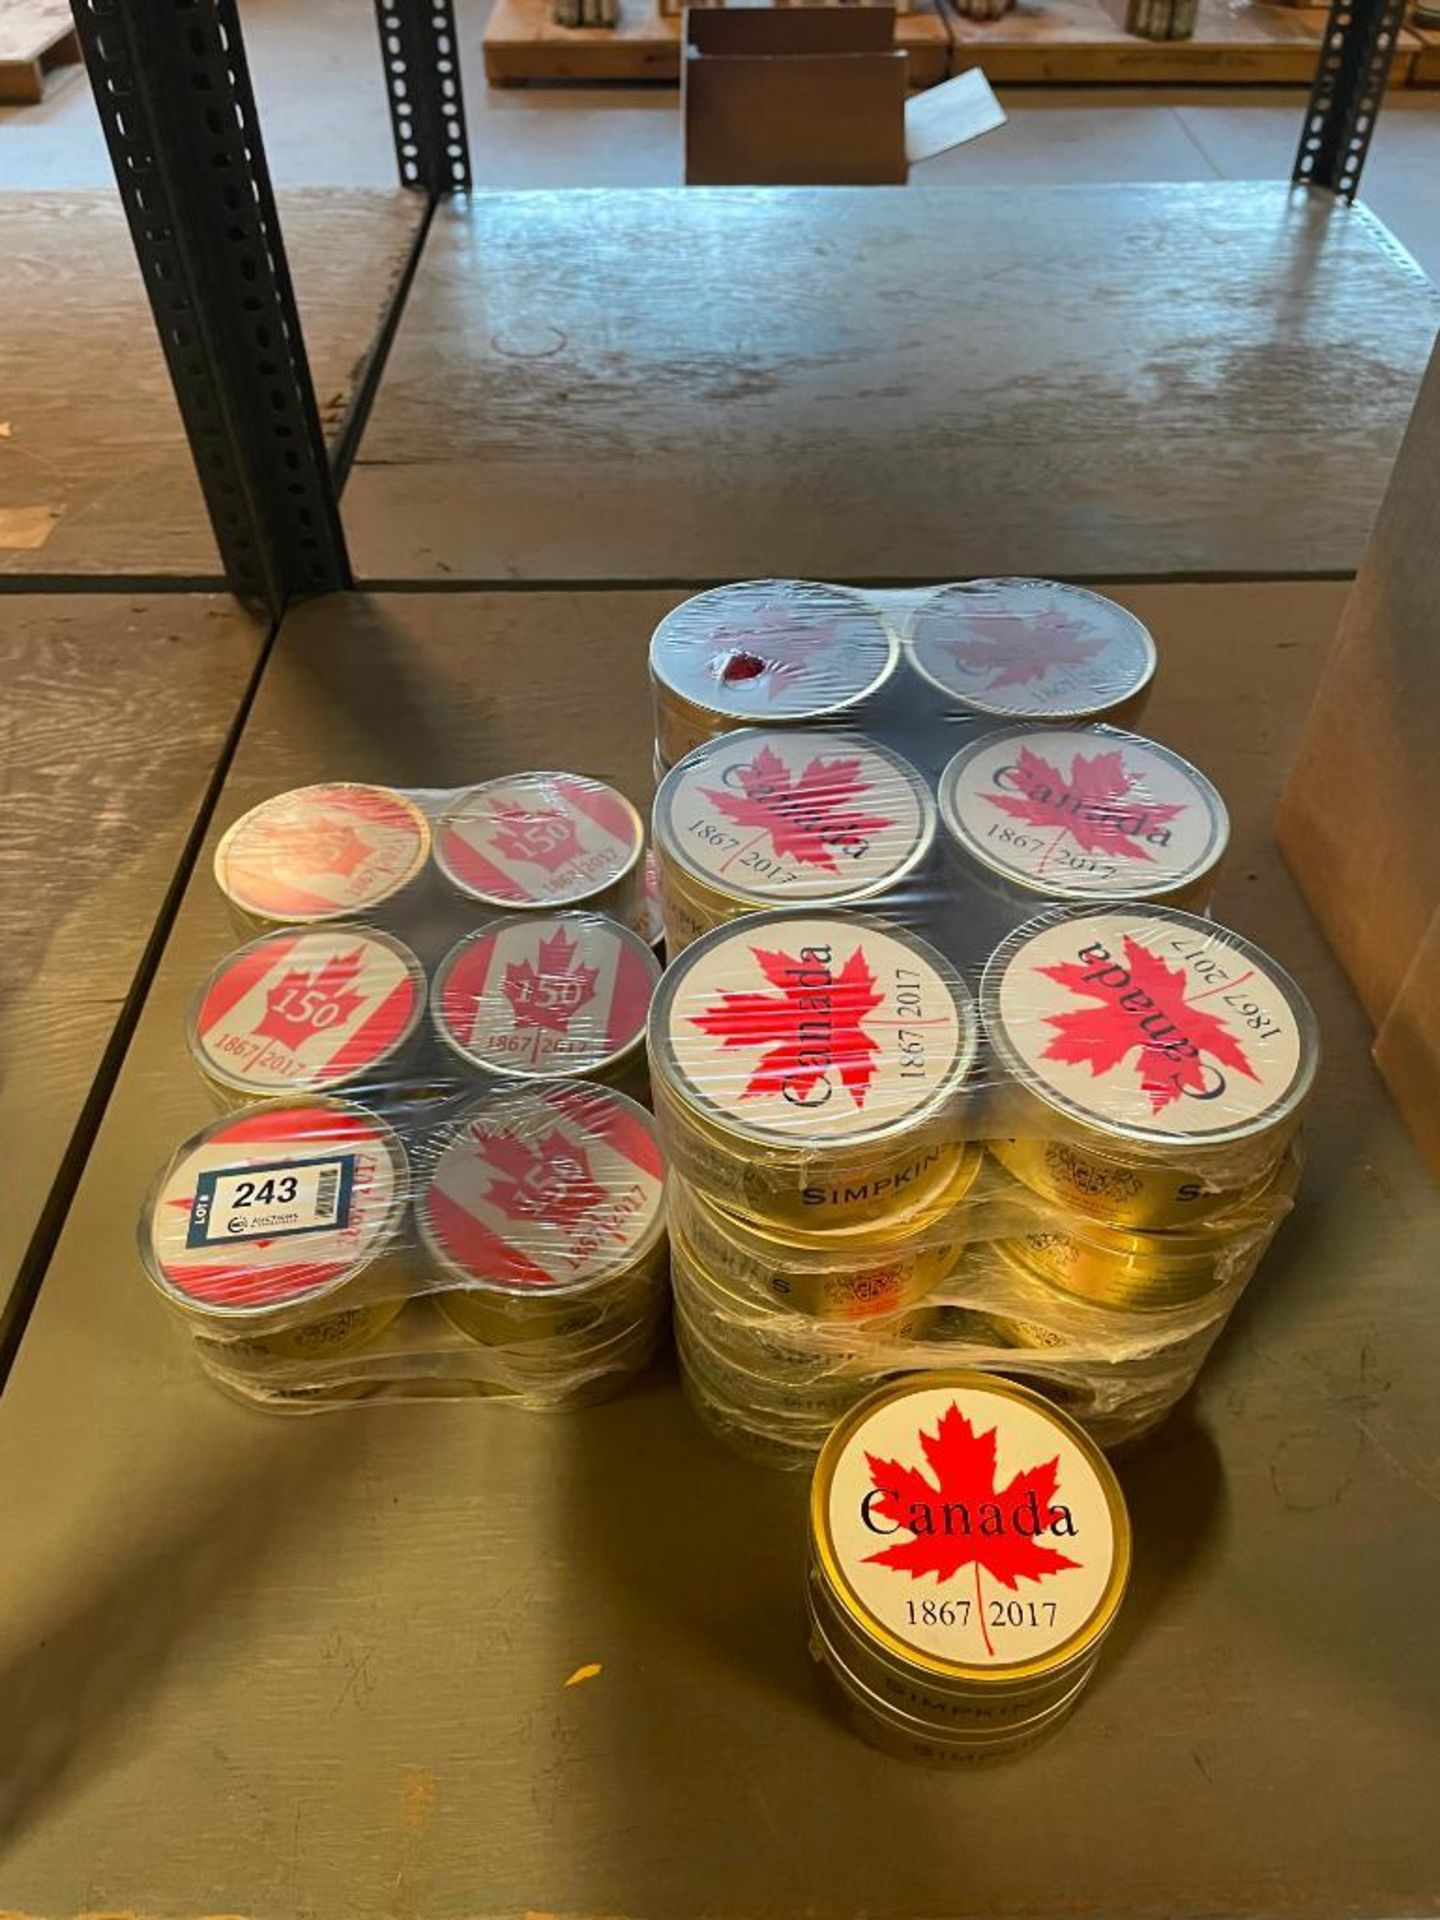 (42) TINS OF SIMPKINS TRAVEL SWEETS, CANADA 150 YEARS DROPS, 200G/TIN